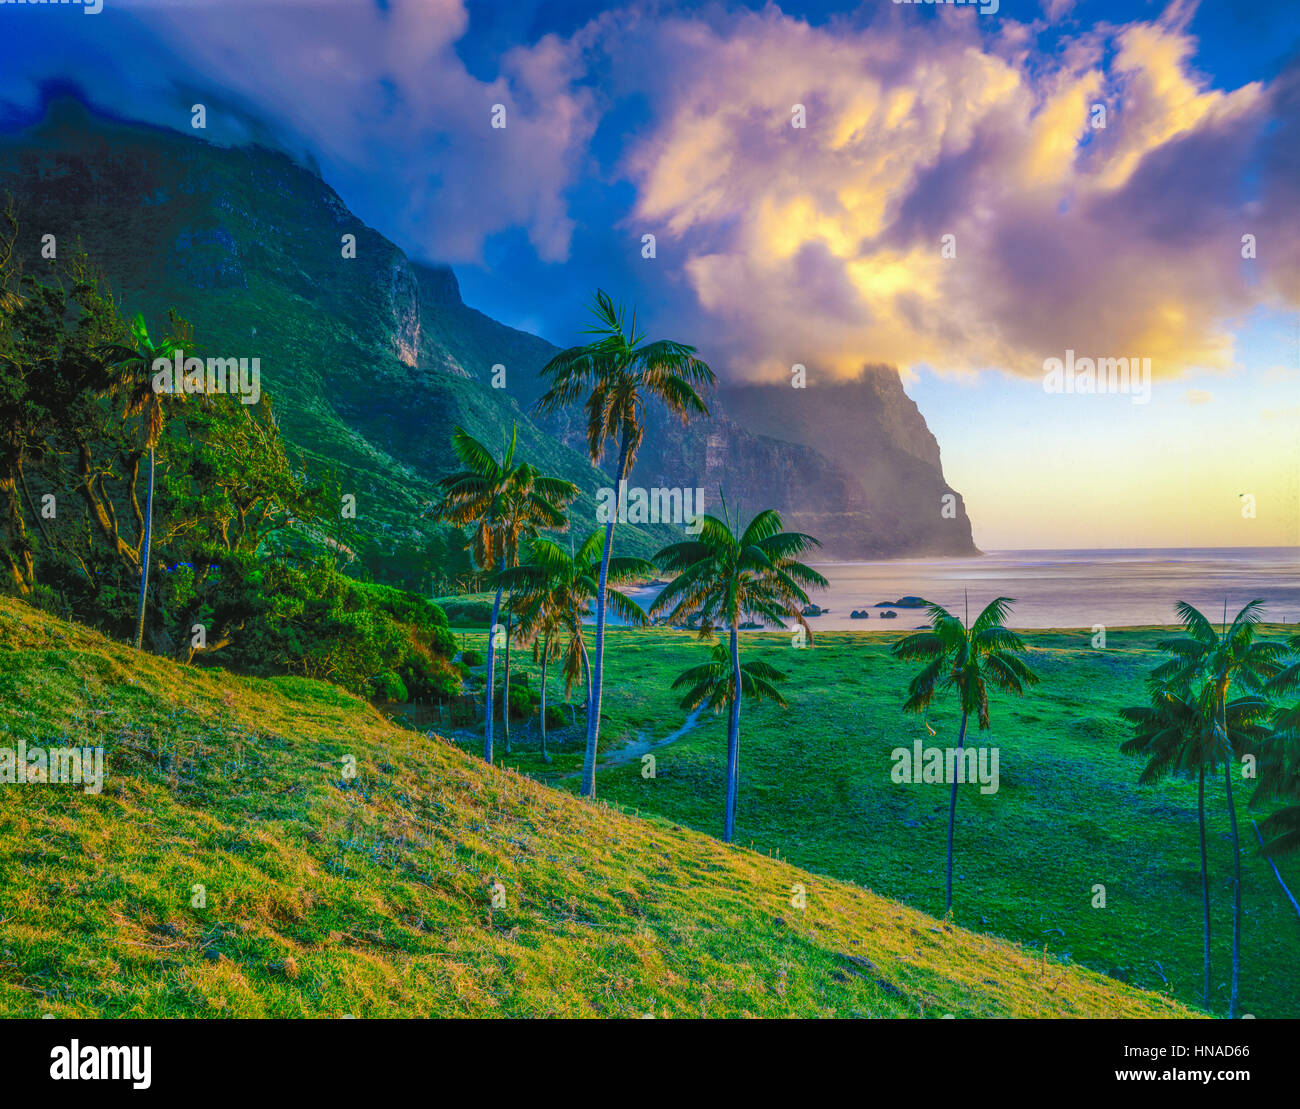 Kentia palms e MTS. Gower e Lidgbird, Isola di Lord Howe, Nuovo Galles del Sud, Australia Howea forsleviana Lord Howe Isalnd NP Oceano Pacifico del Sud Foto Stock